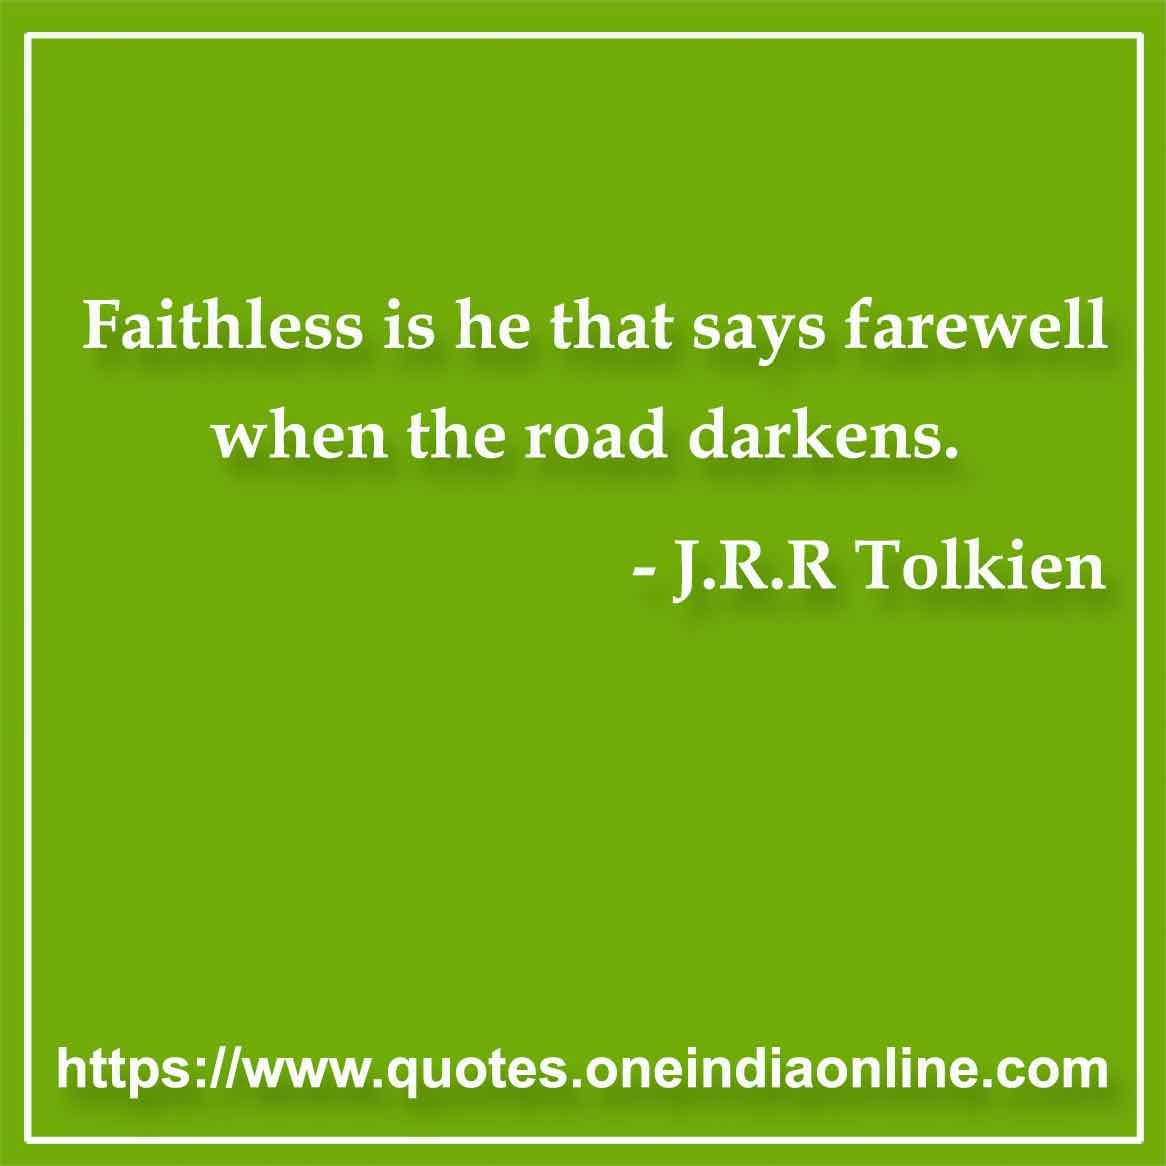 Faithless is he that says farewell when the road darkens.

- Faith Quotes by J.R.R Tolkien